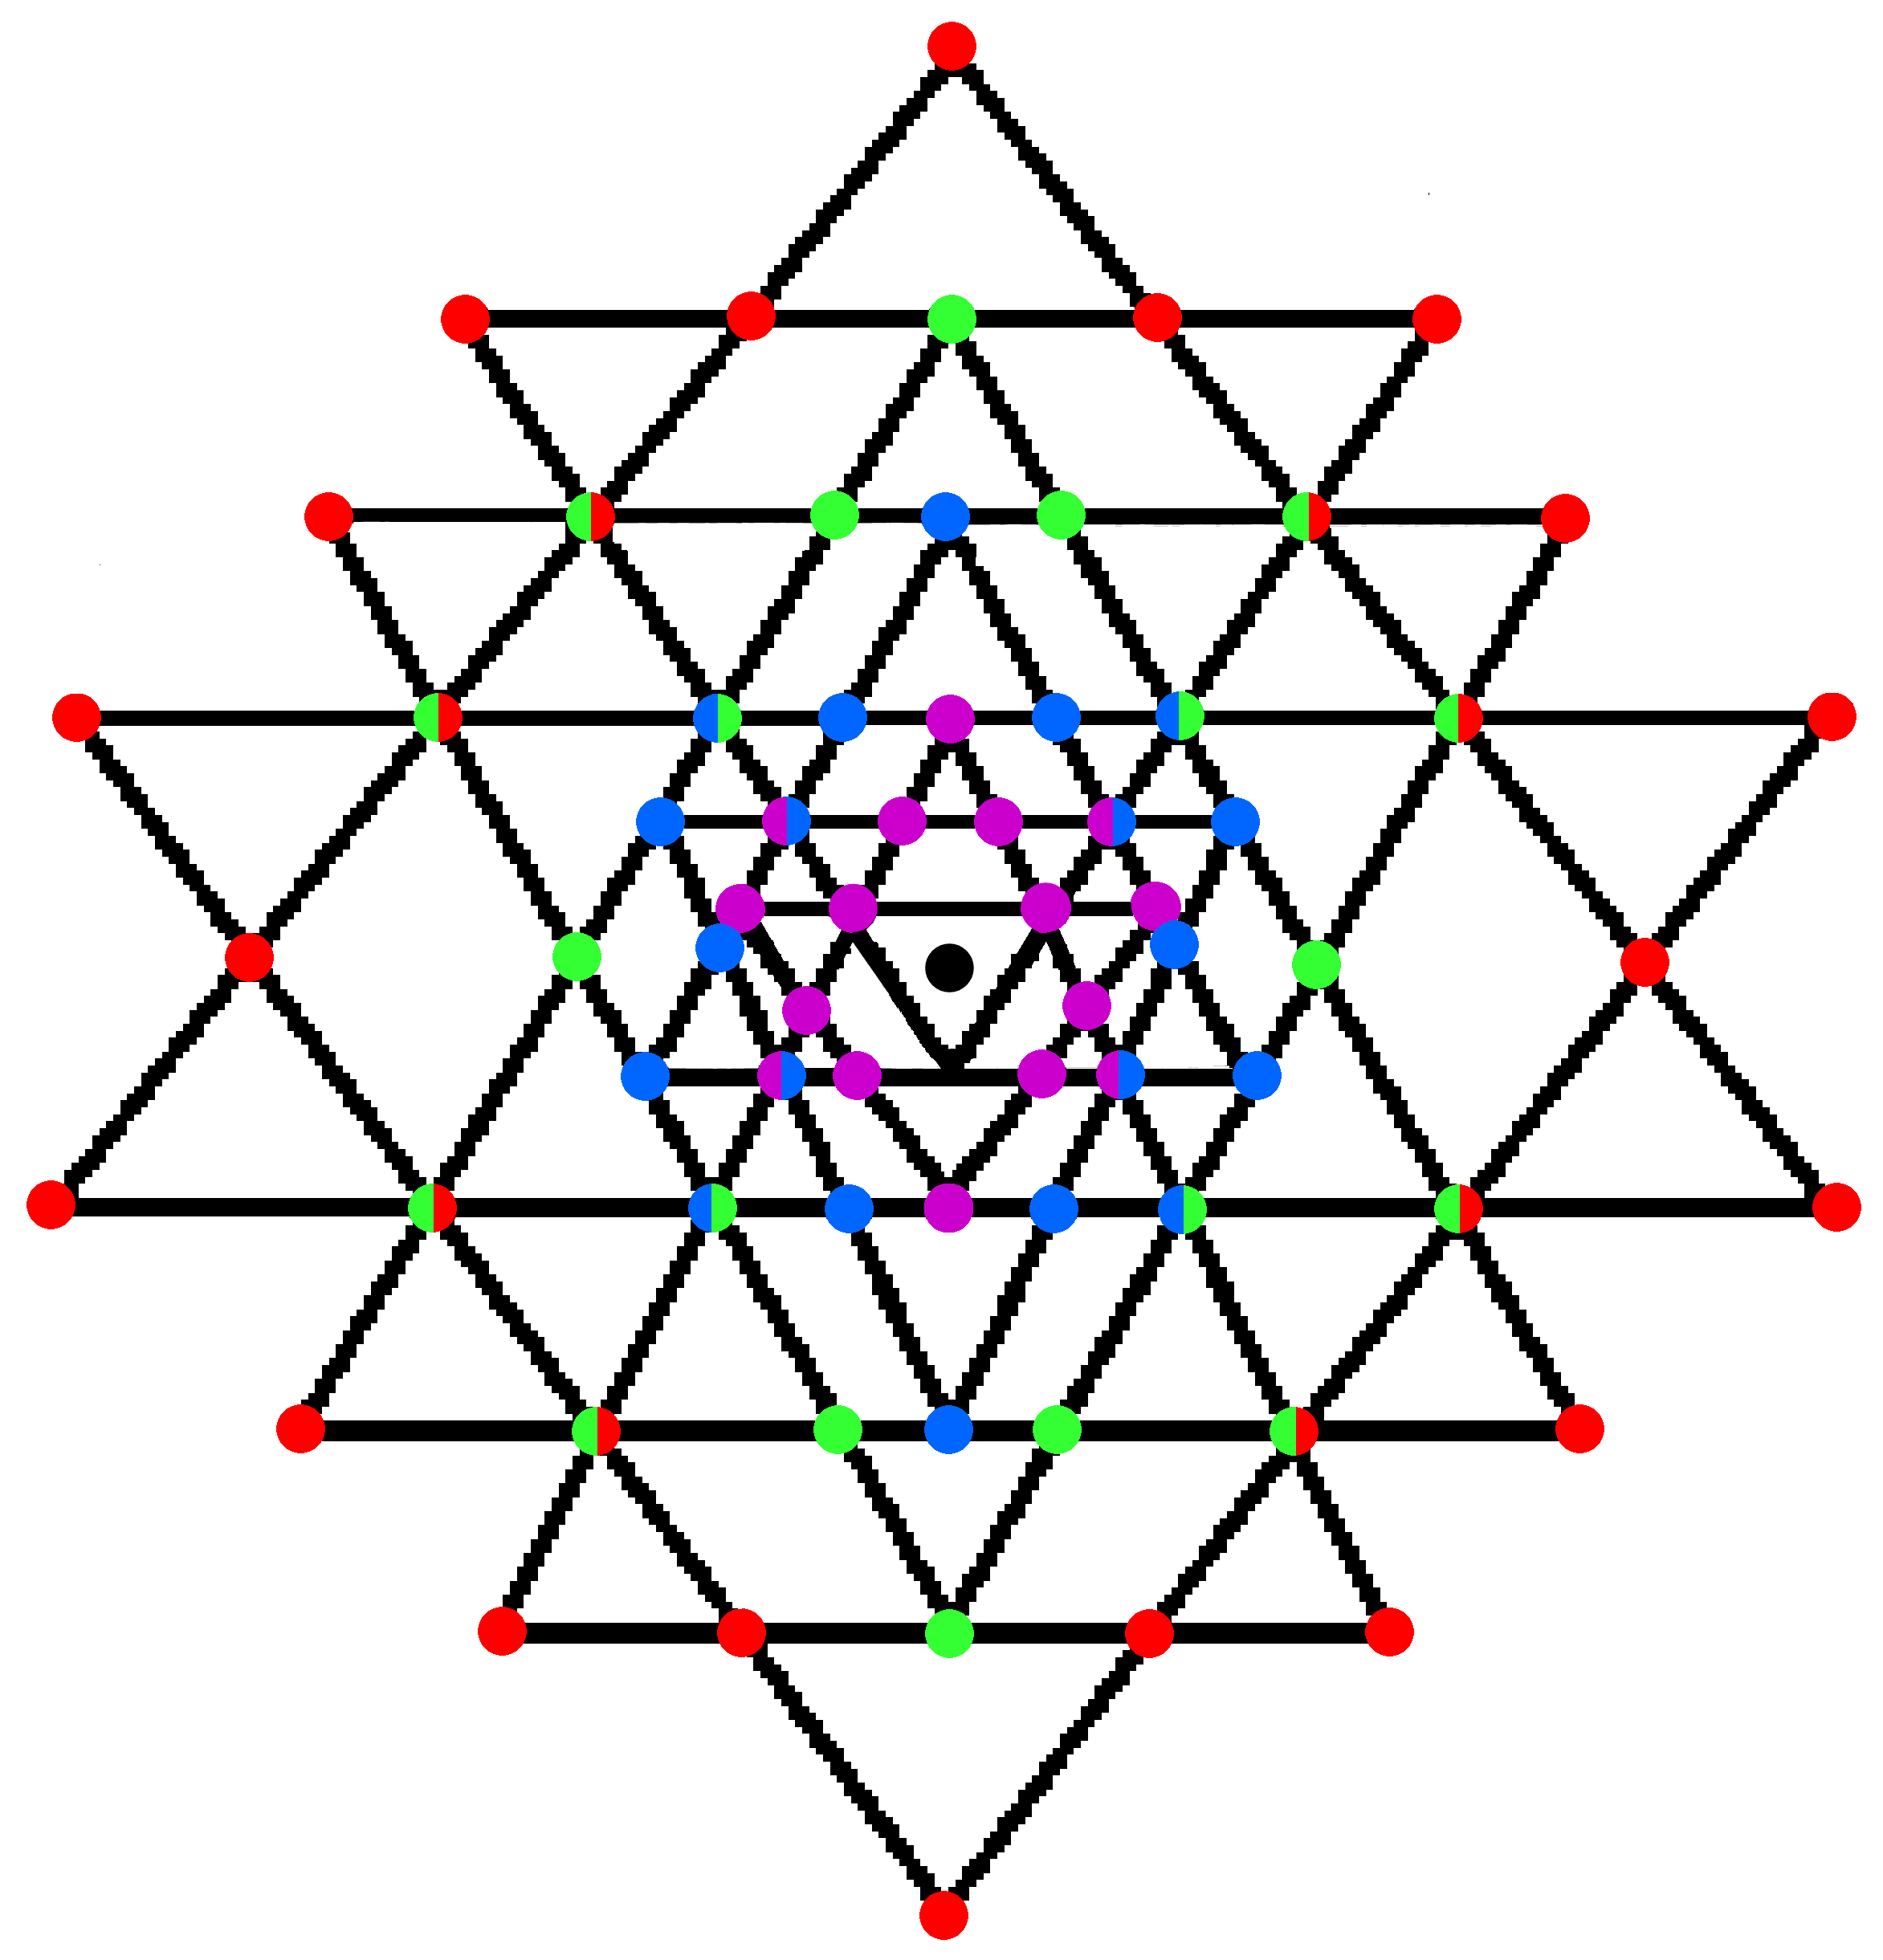 42 triangles in Sir Yantra have 84 corners